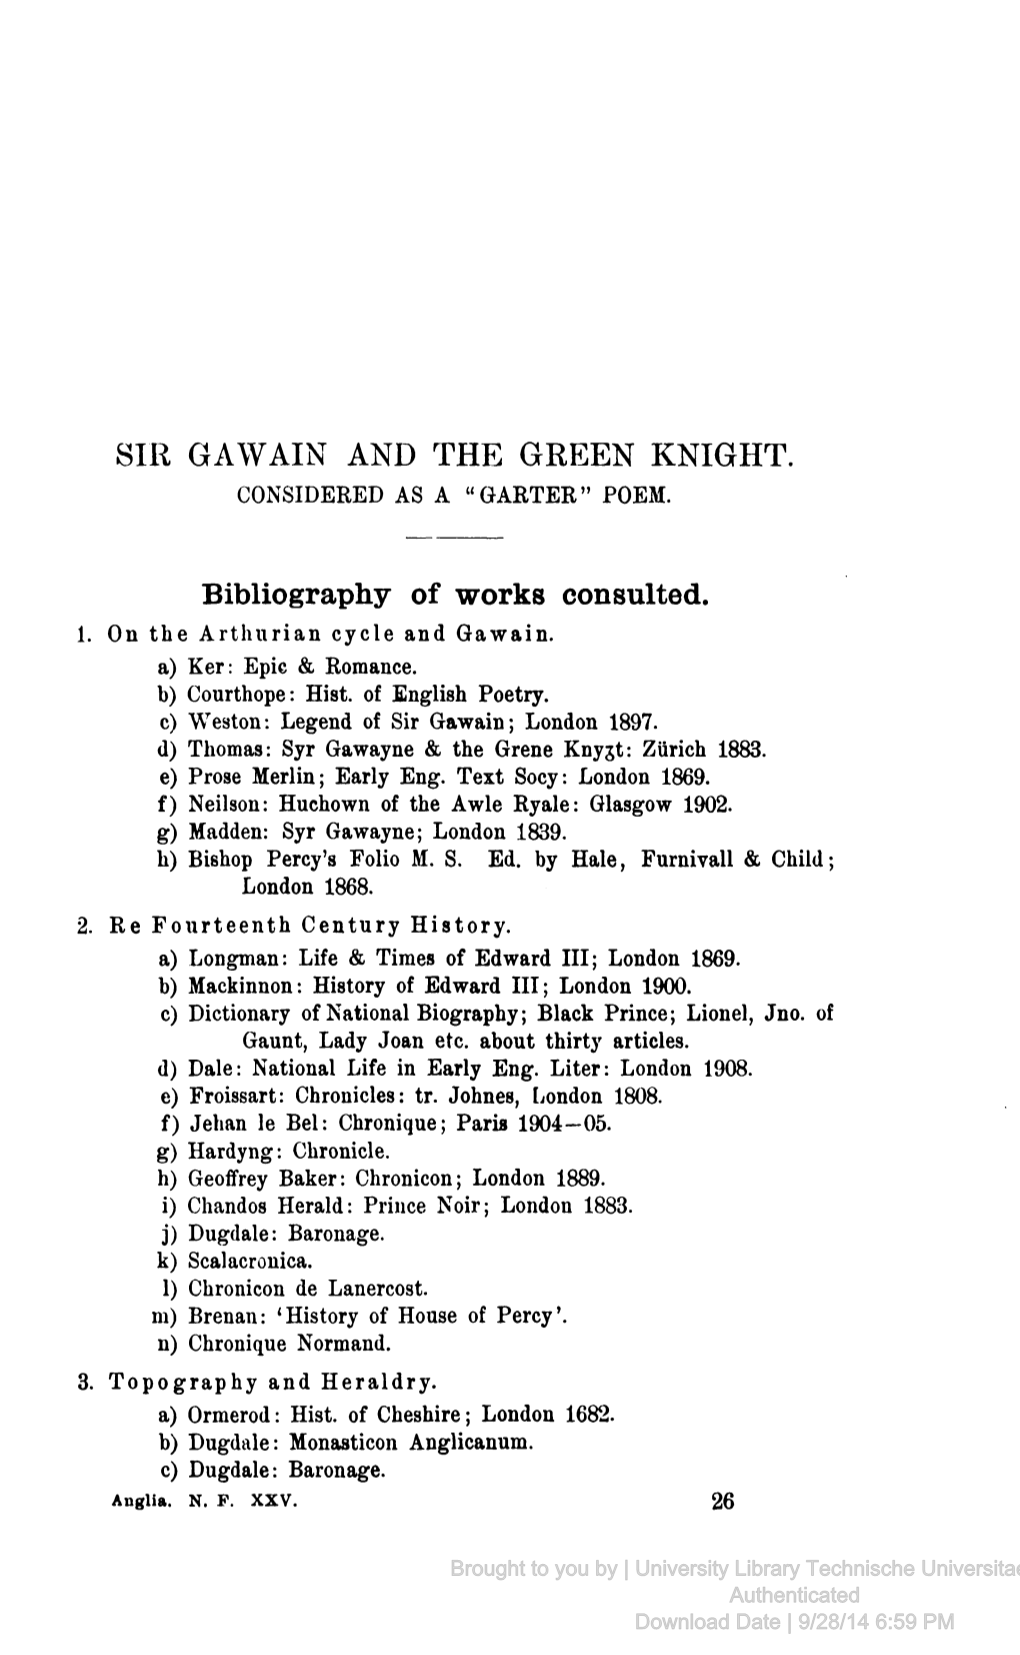 SIR GAWAIN and the GREEN KNIGHT. Bibliography of Works